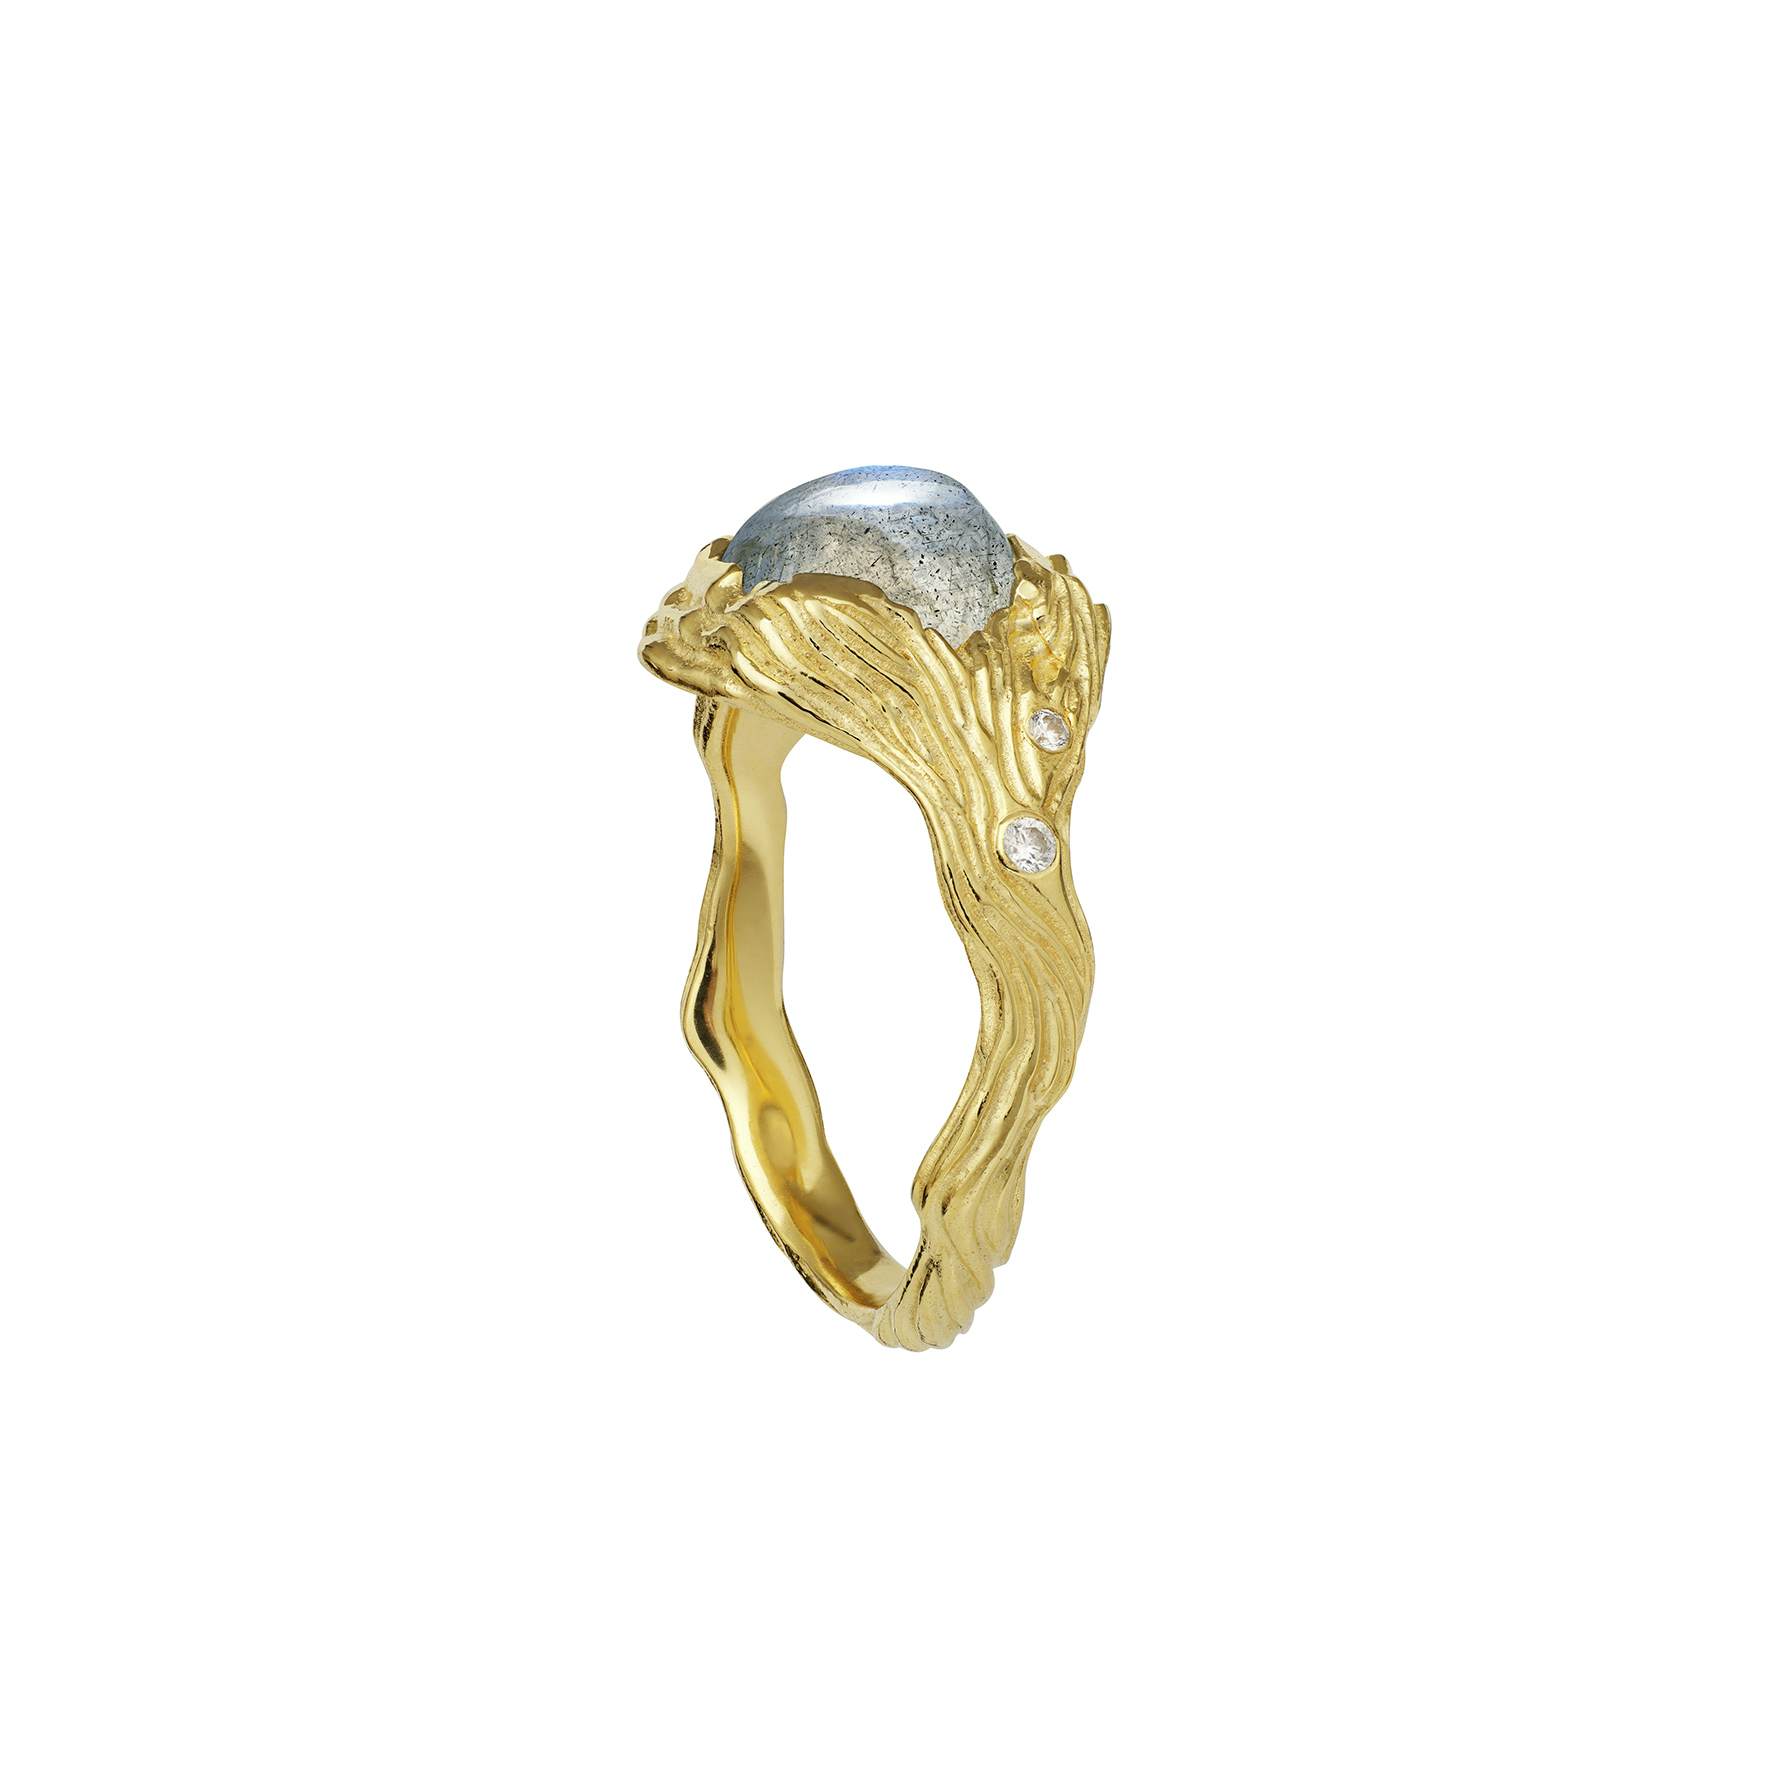 Calypso Water Ring from Maanesten in Goldplated-Silver Sterling 925